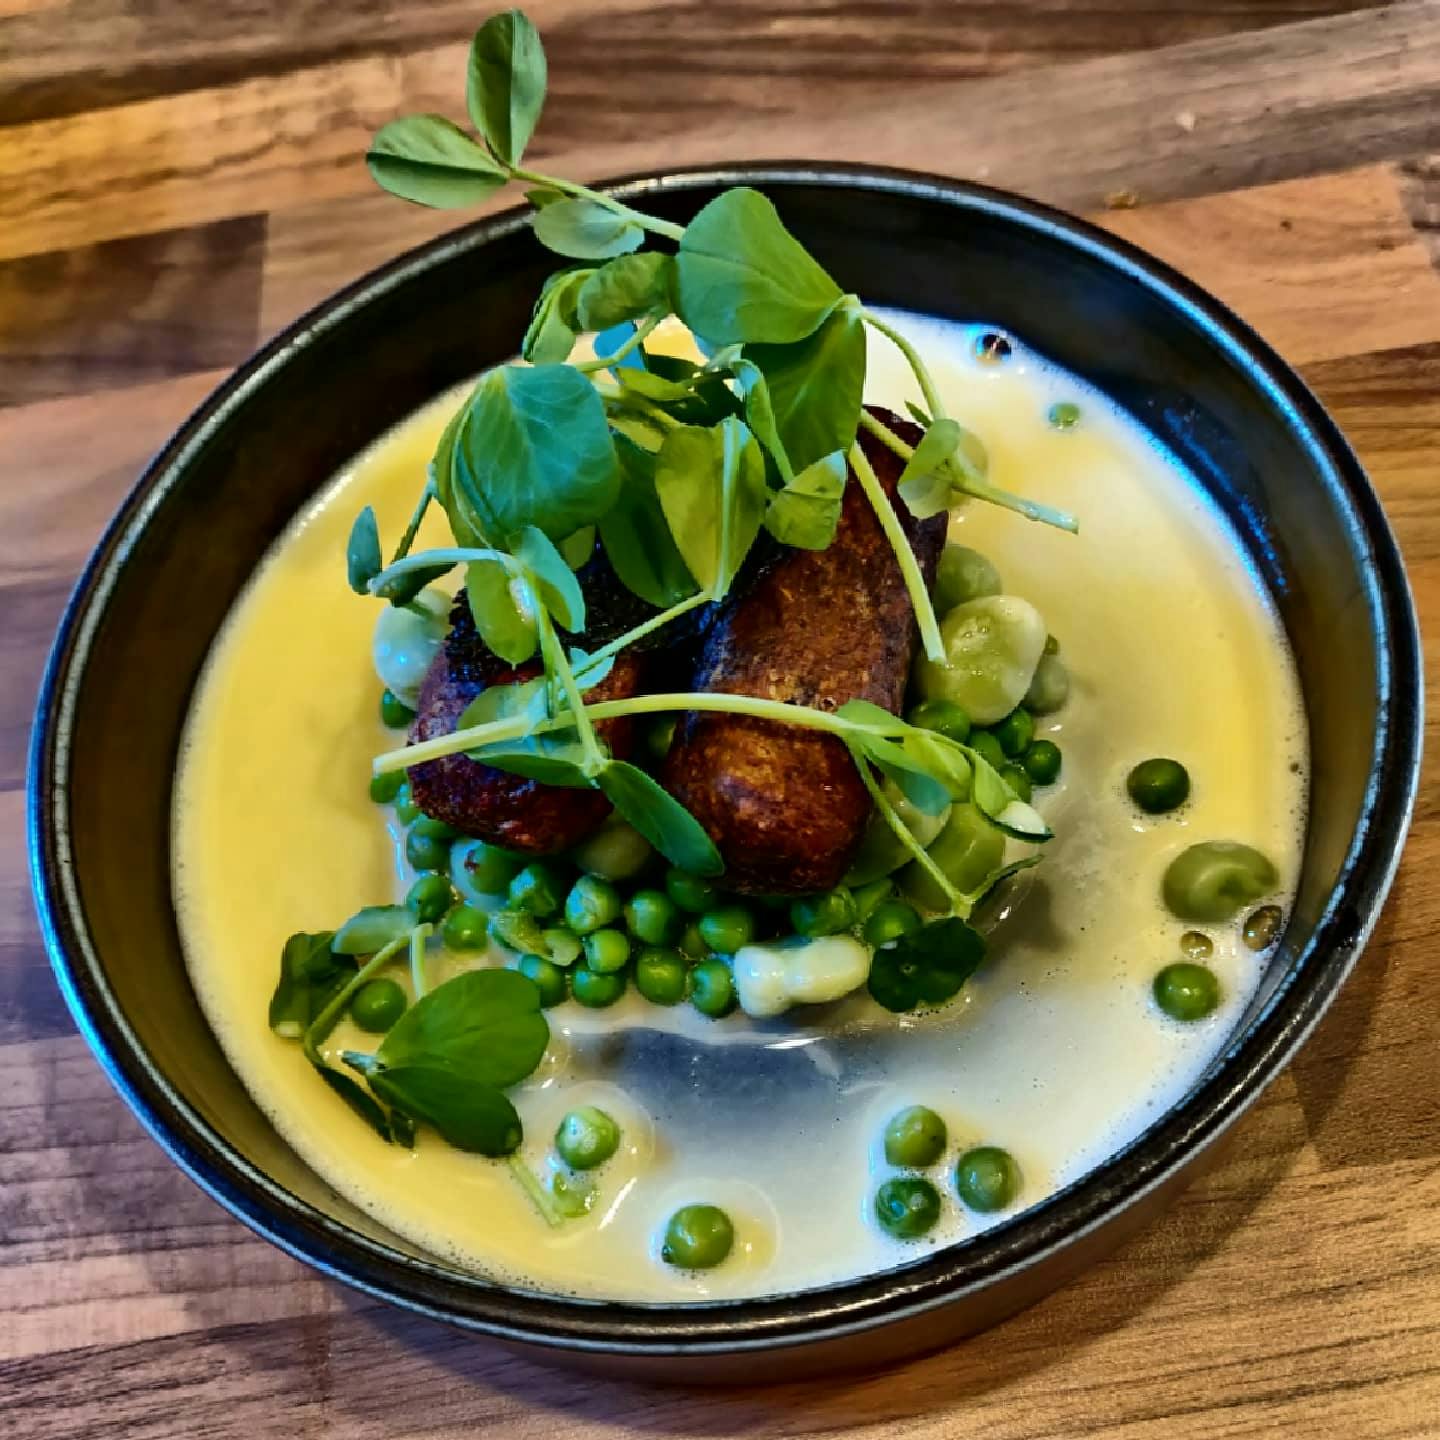 A course from the spring 2021 menu at Luke's Place